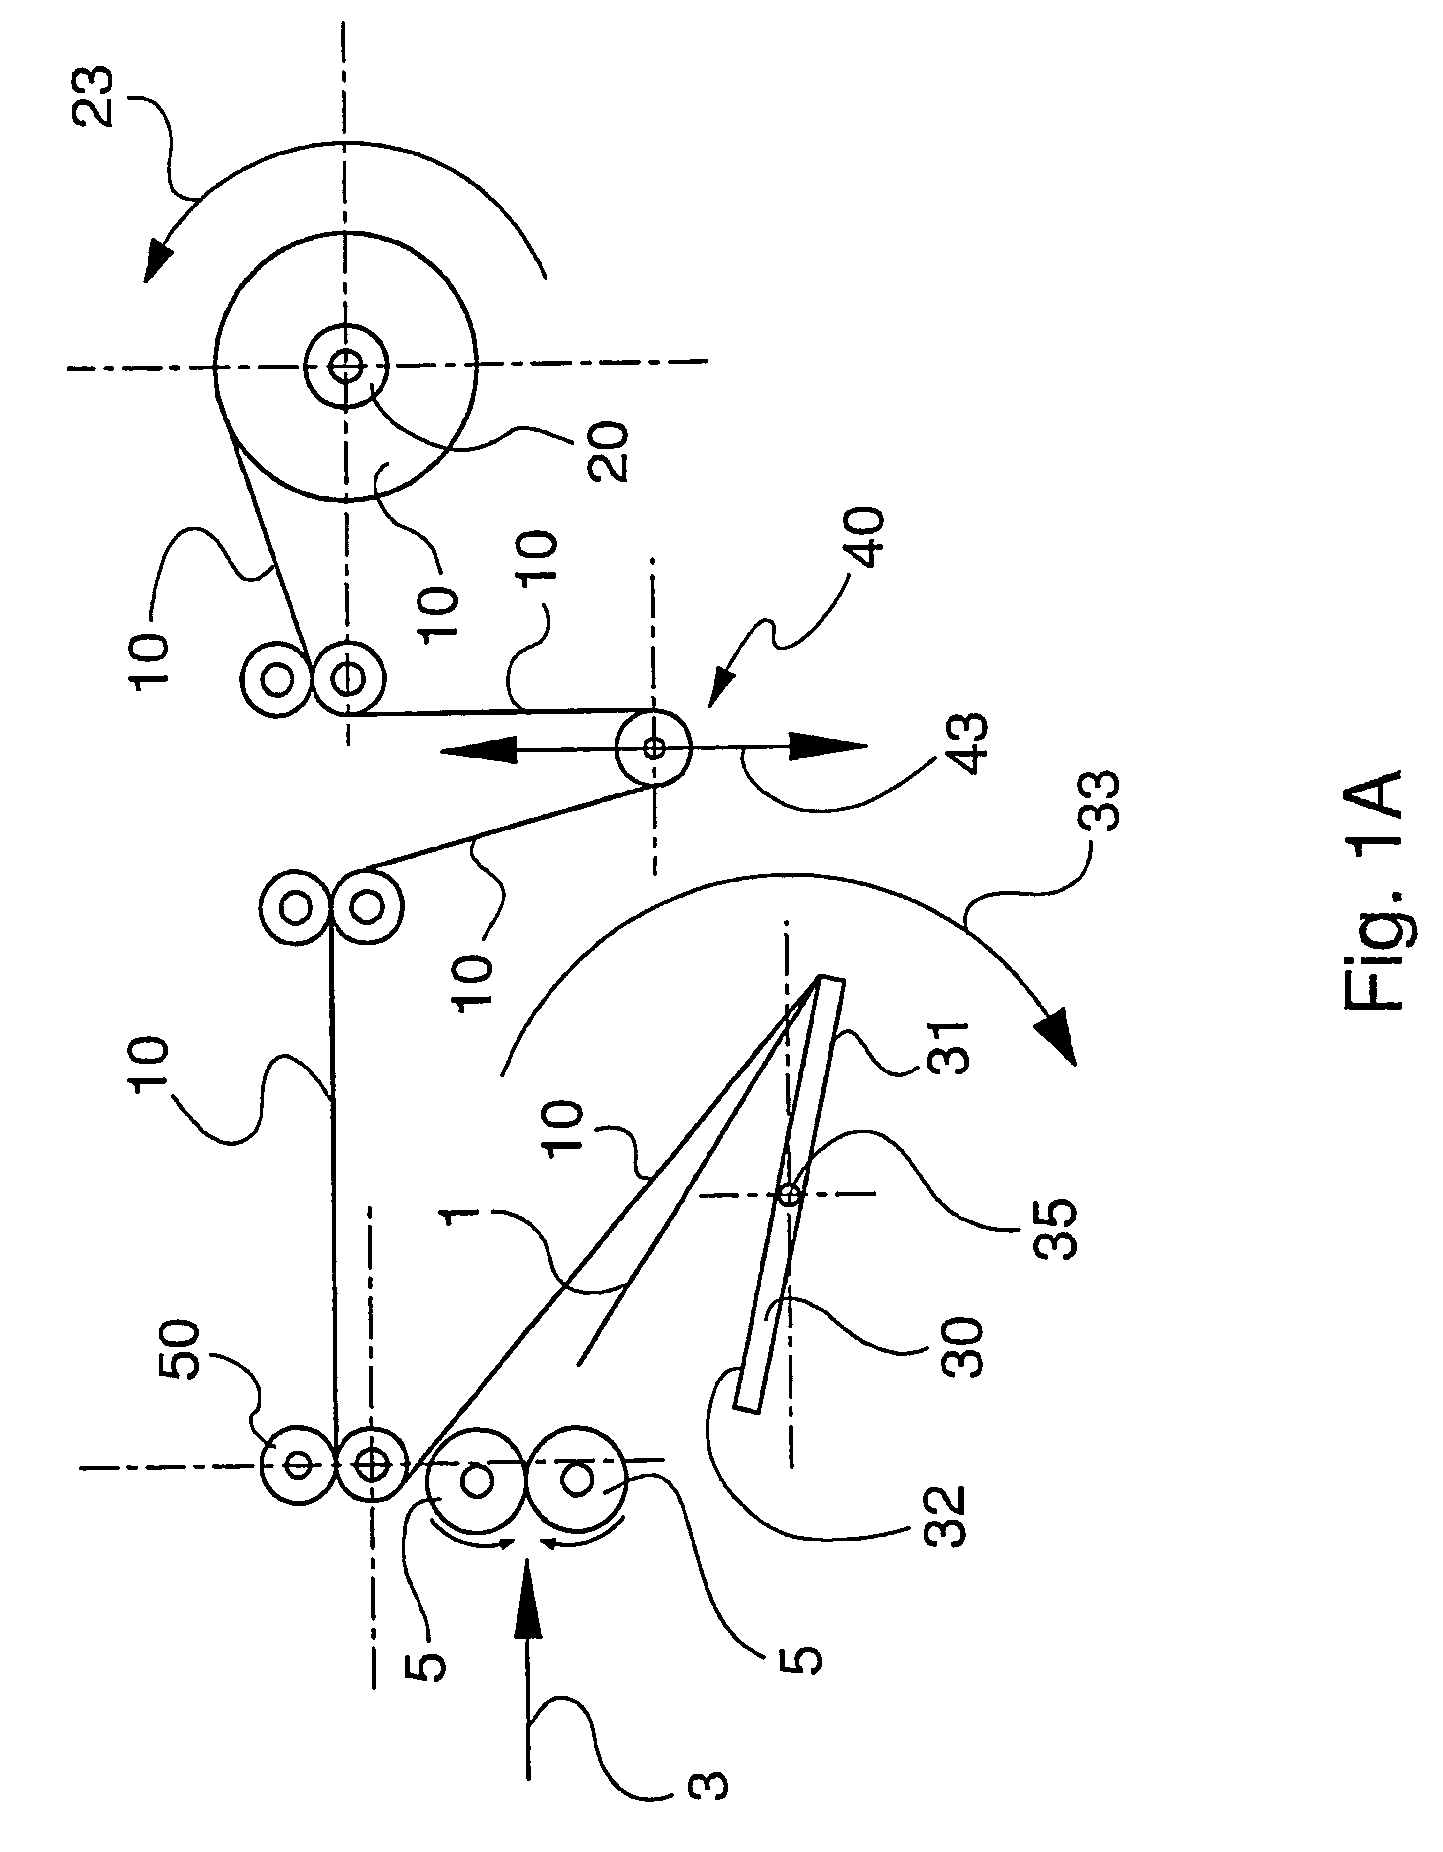 Device and method for storing and/or dispensing rigid or flexible substantially planar items